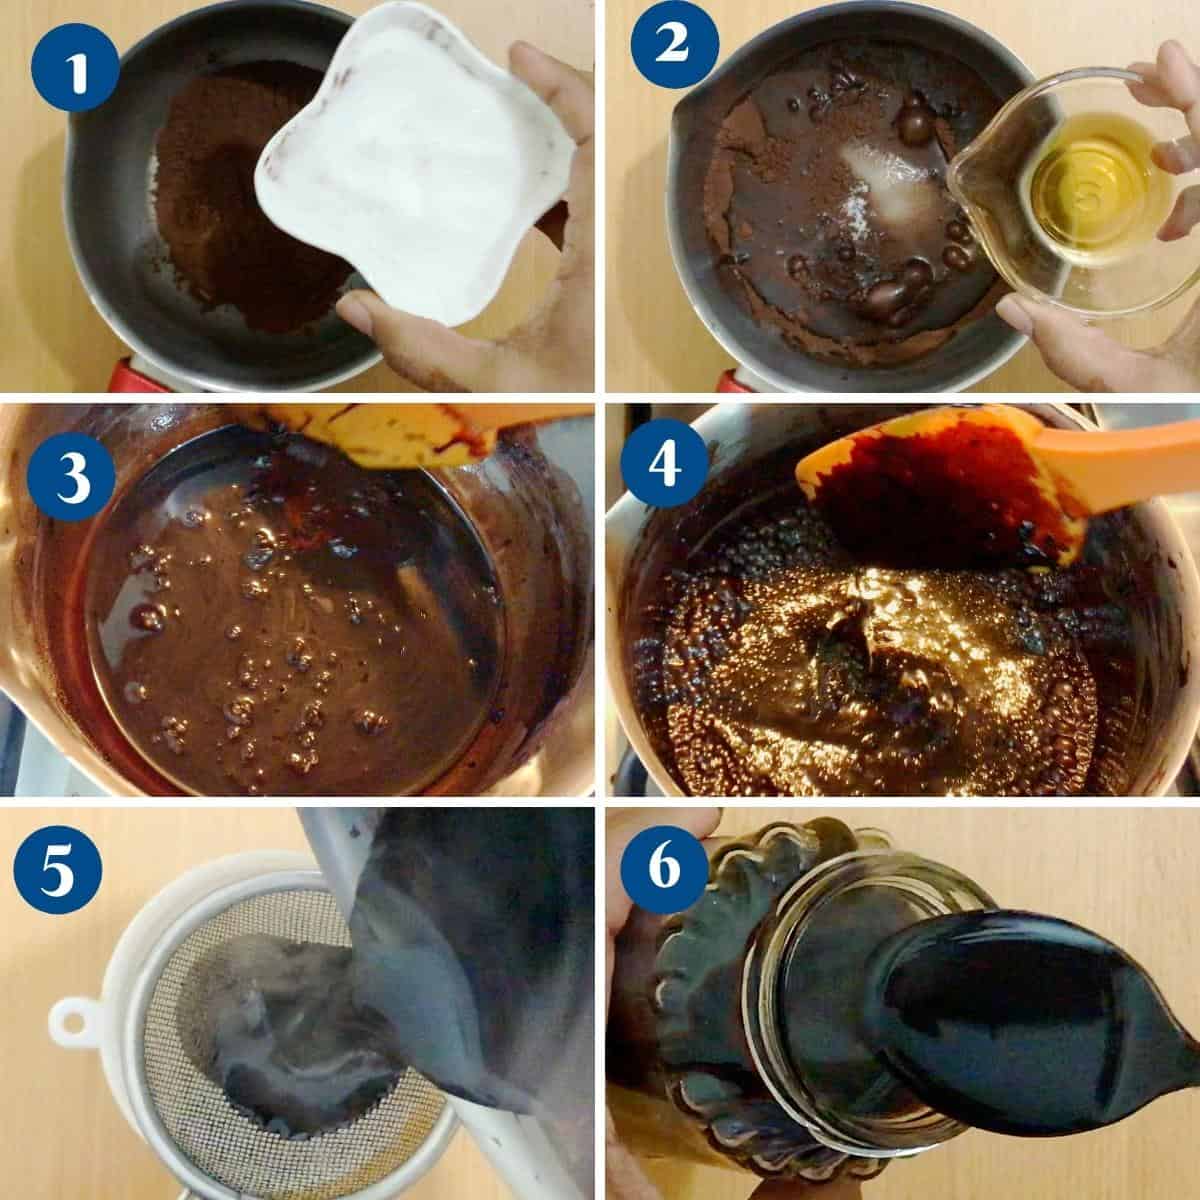 Progress pictures how to make breakfast syrup chocolate.